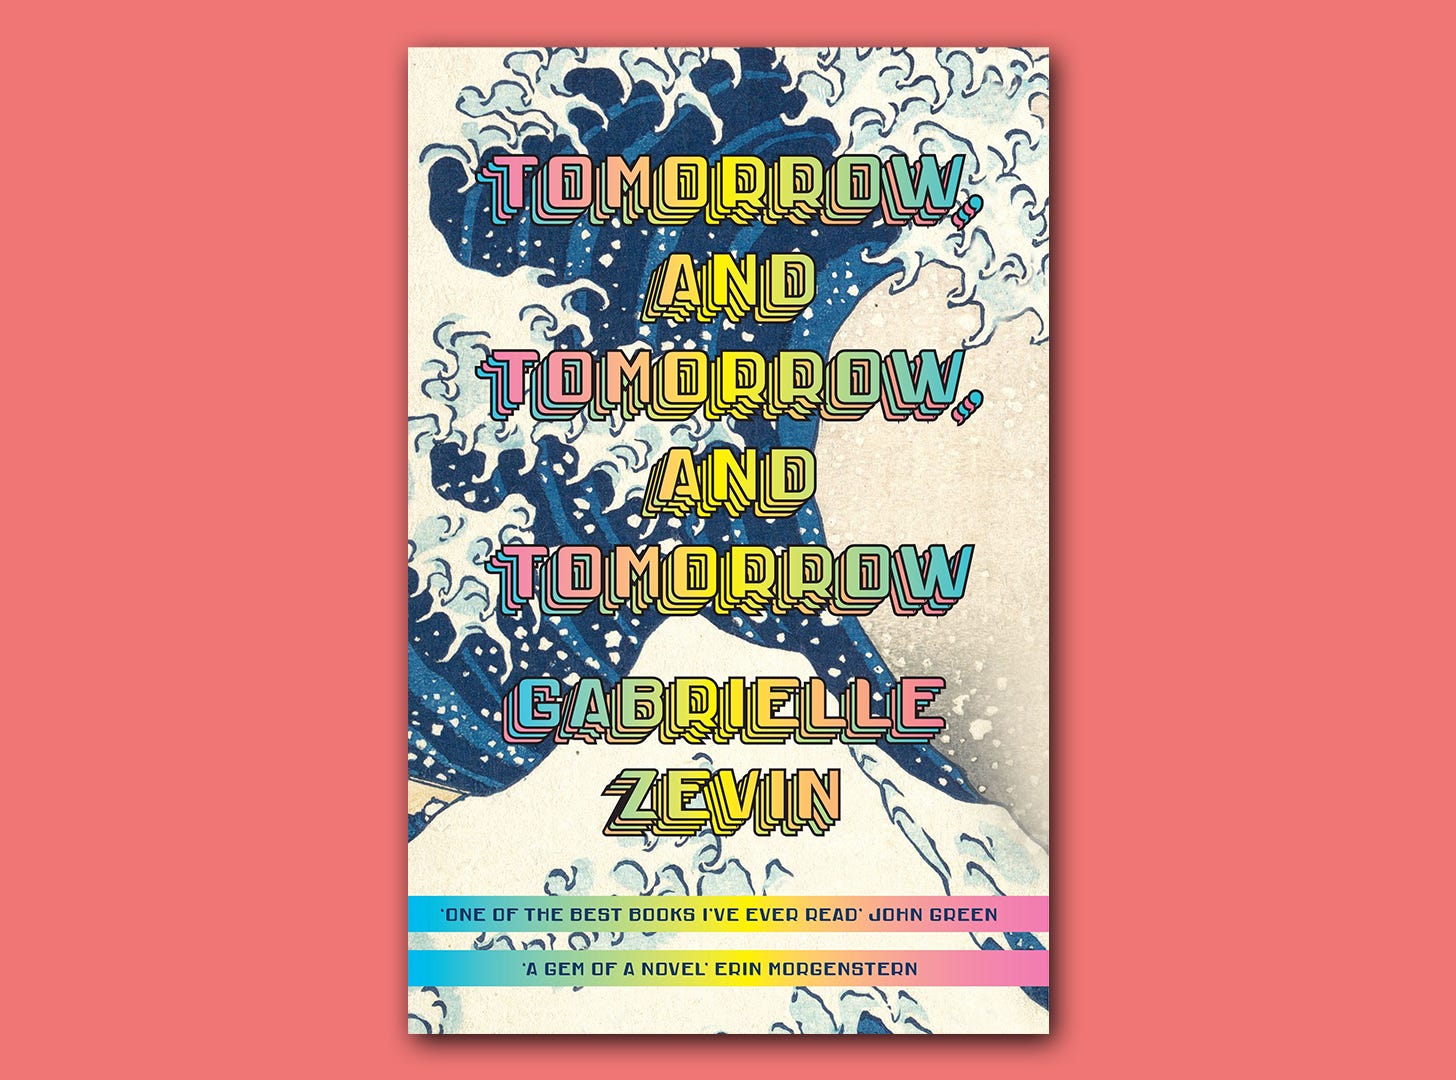 The book cover for "Tomorrow, and Tomorrow, and Tomorrow" by Gabrielle Zevin superimposed on a light pink block colour background. The book cover is a close up of "The Great Wave of Kanagawa" which is a famous woodblock print by the Japanese artist Hokusai. It is a giant wave swelling and ready to crash onto shore. The title is printed over this image in big, bold, rainbow, capital letters.